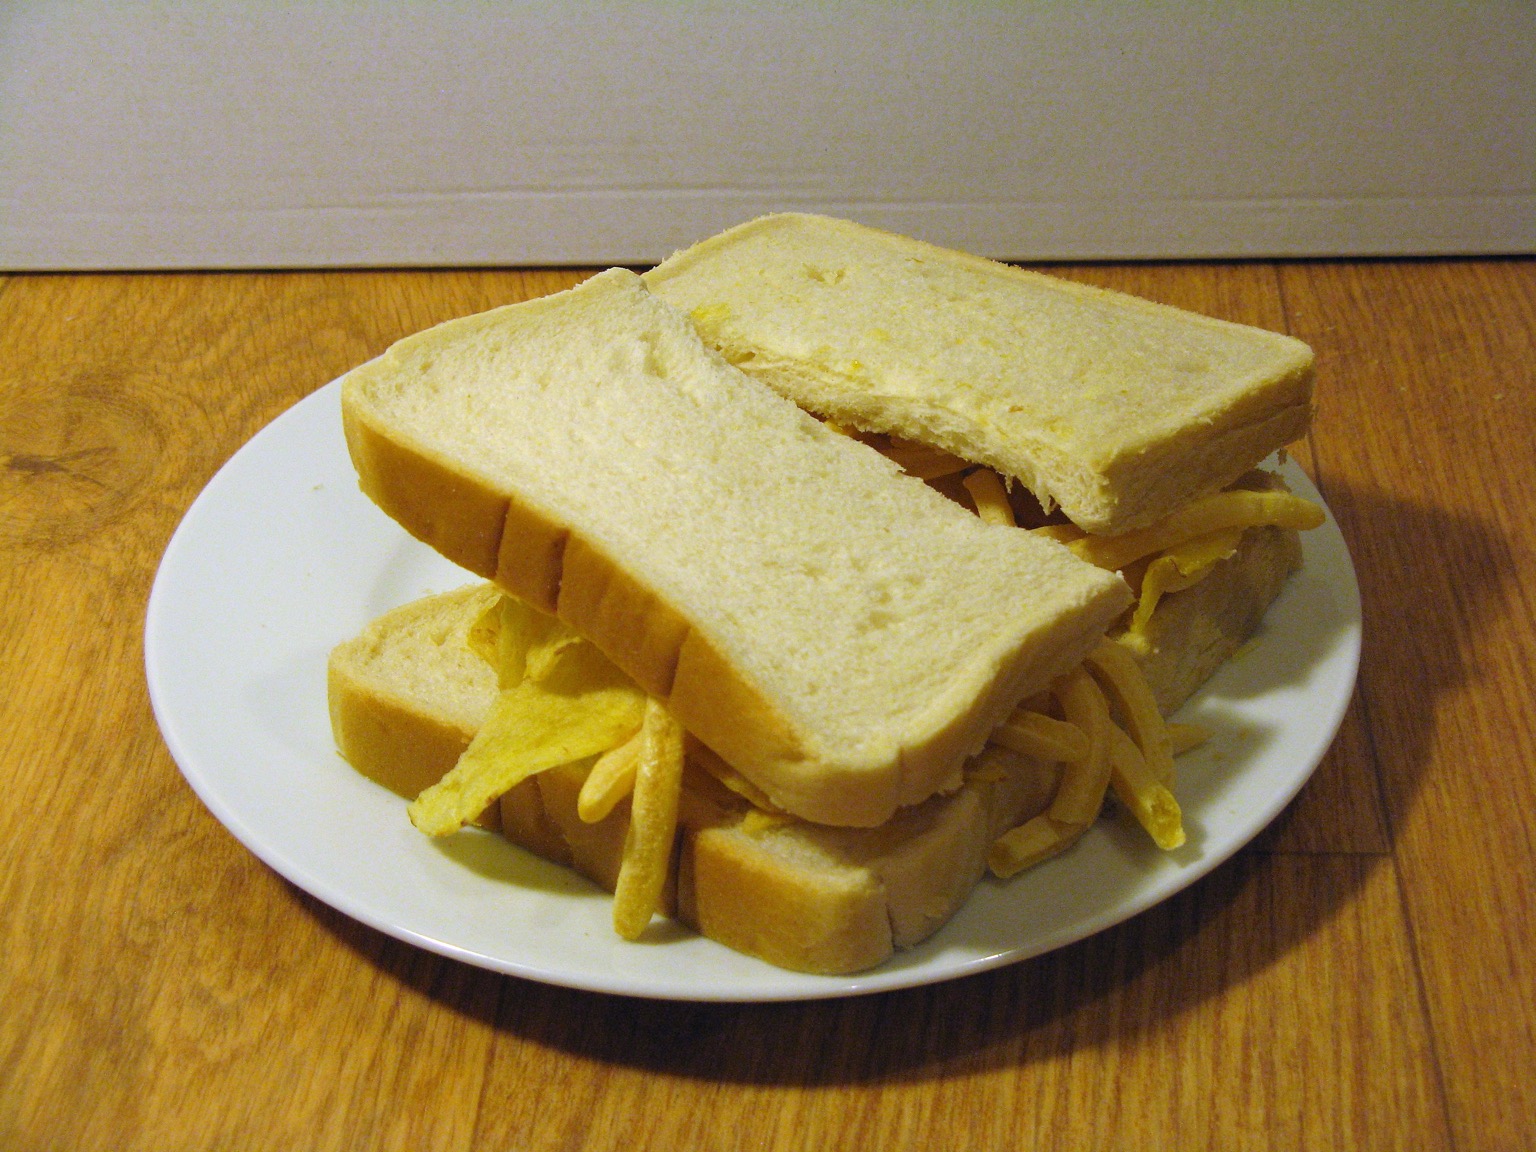 Halved sandwich containing crisps and French Fries